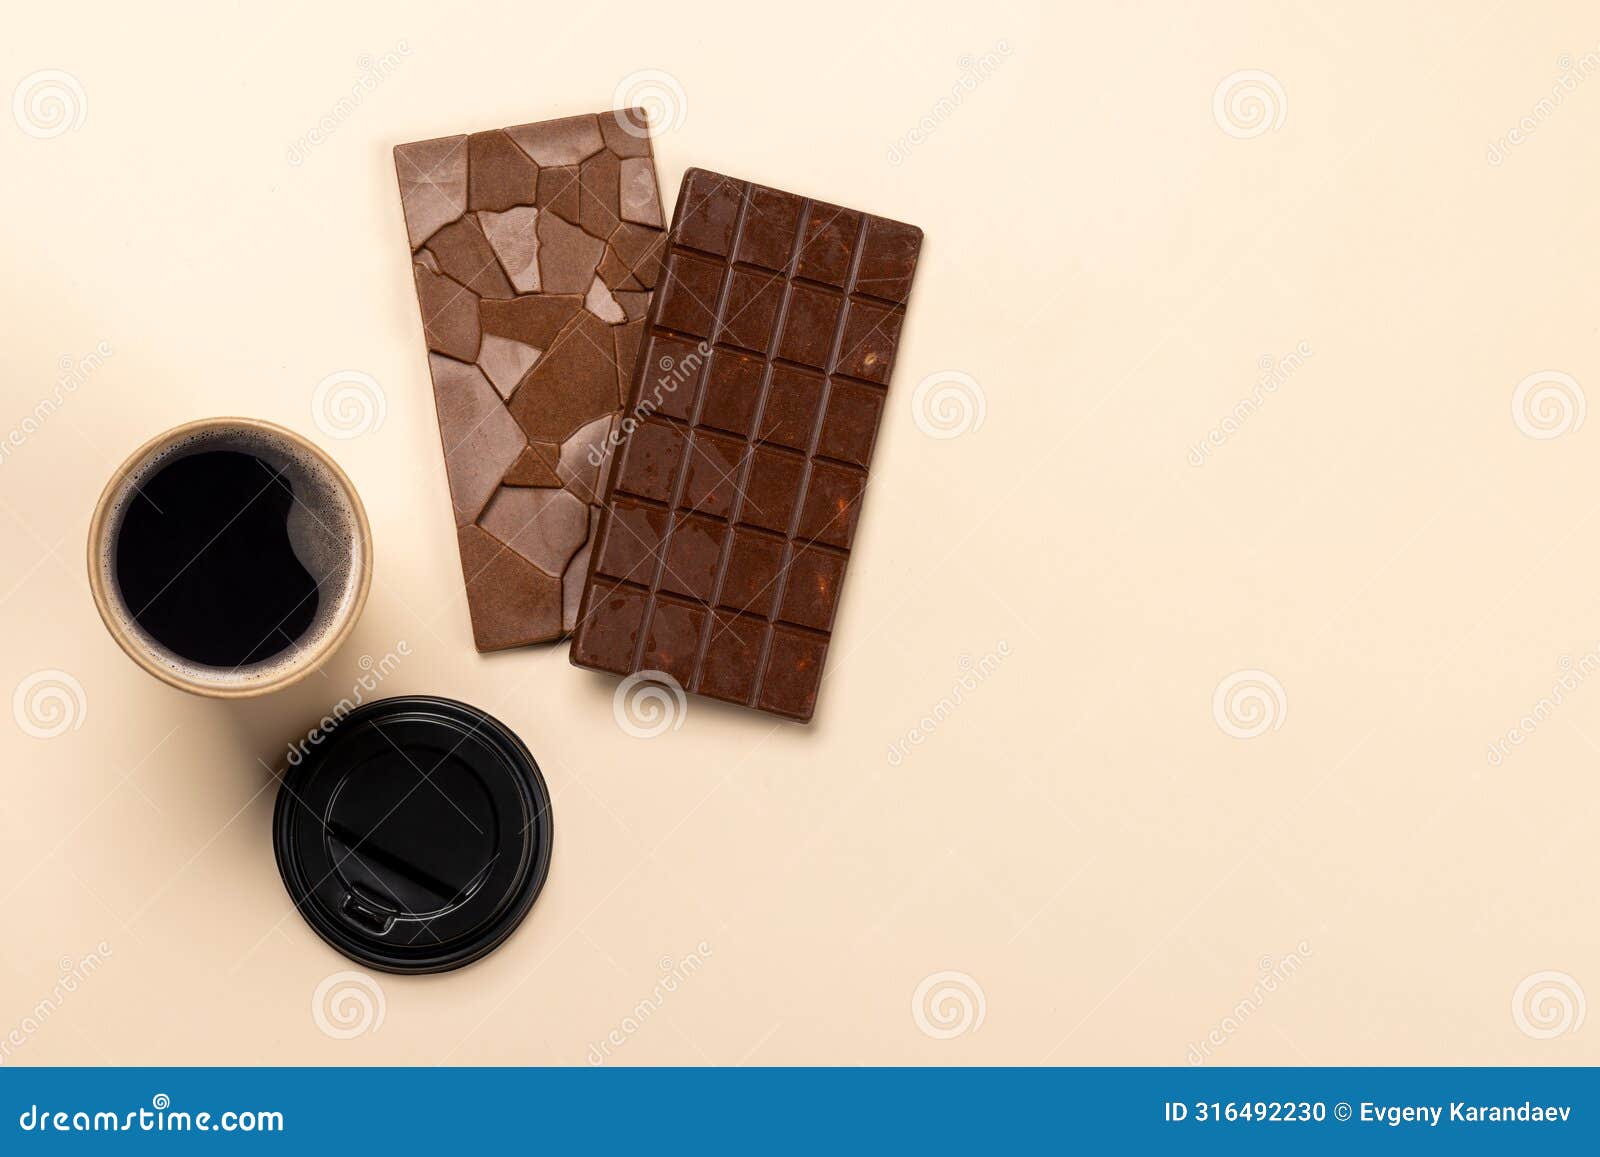 coffee break bliss: chocolate bars paired with a cup of coffee